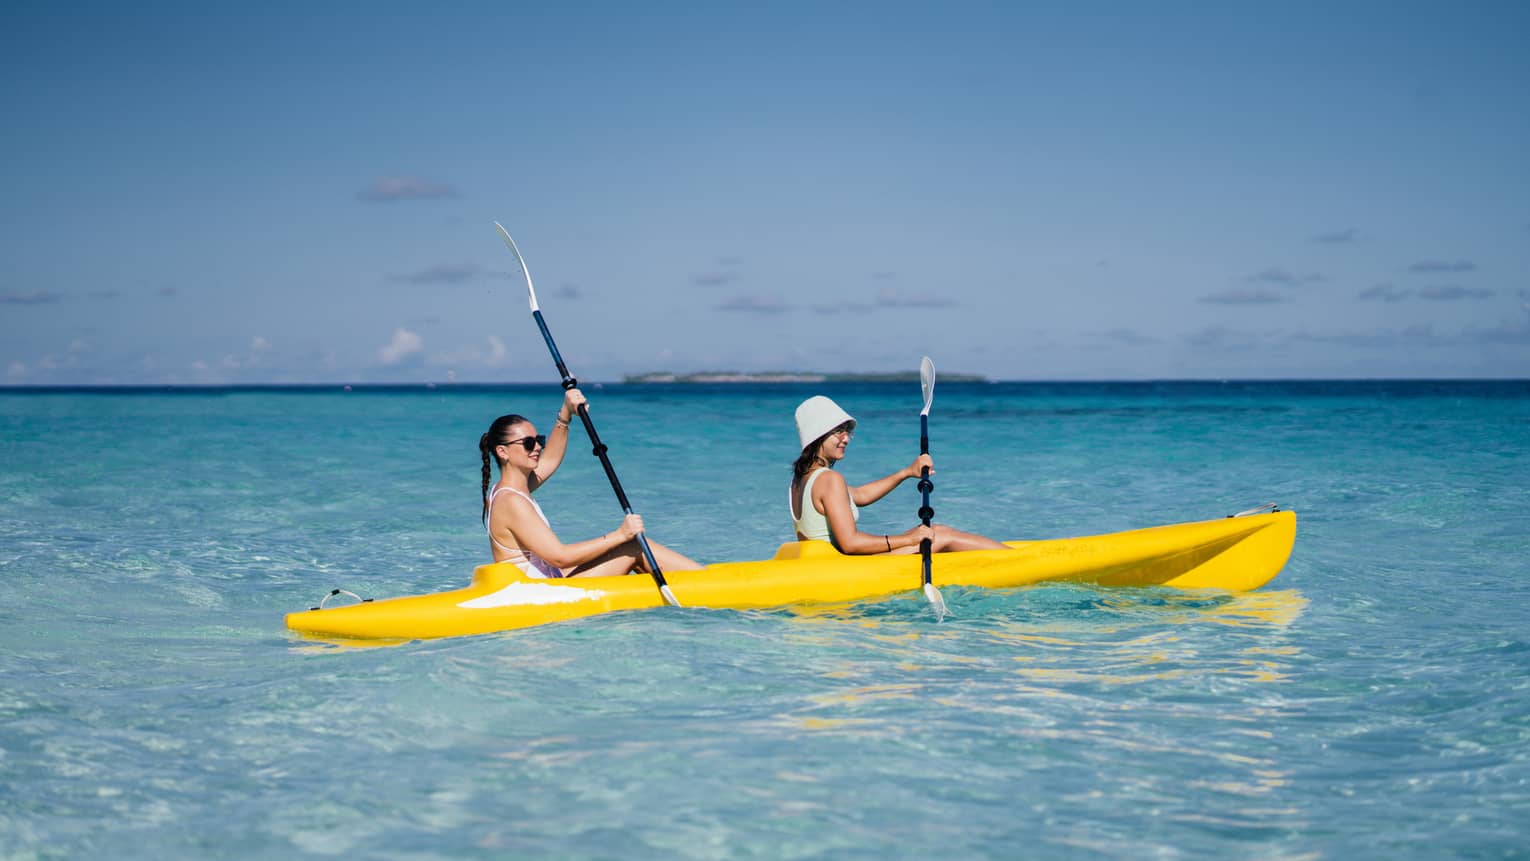 Two people smile as they paddle a yellow kayak in a turquoise lagoon under a clear blue sky; low island in the distance.